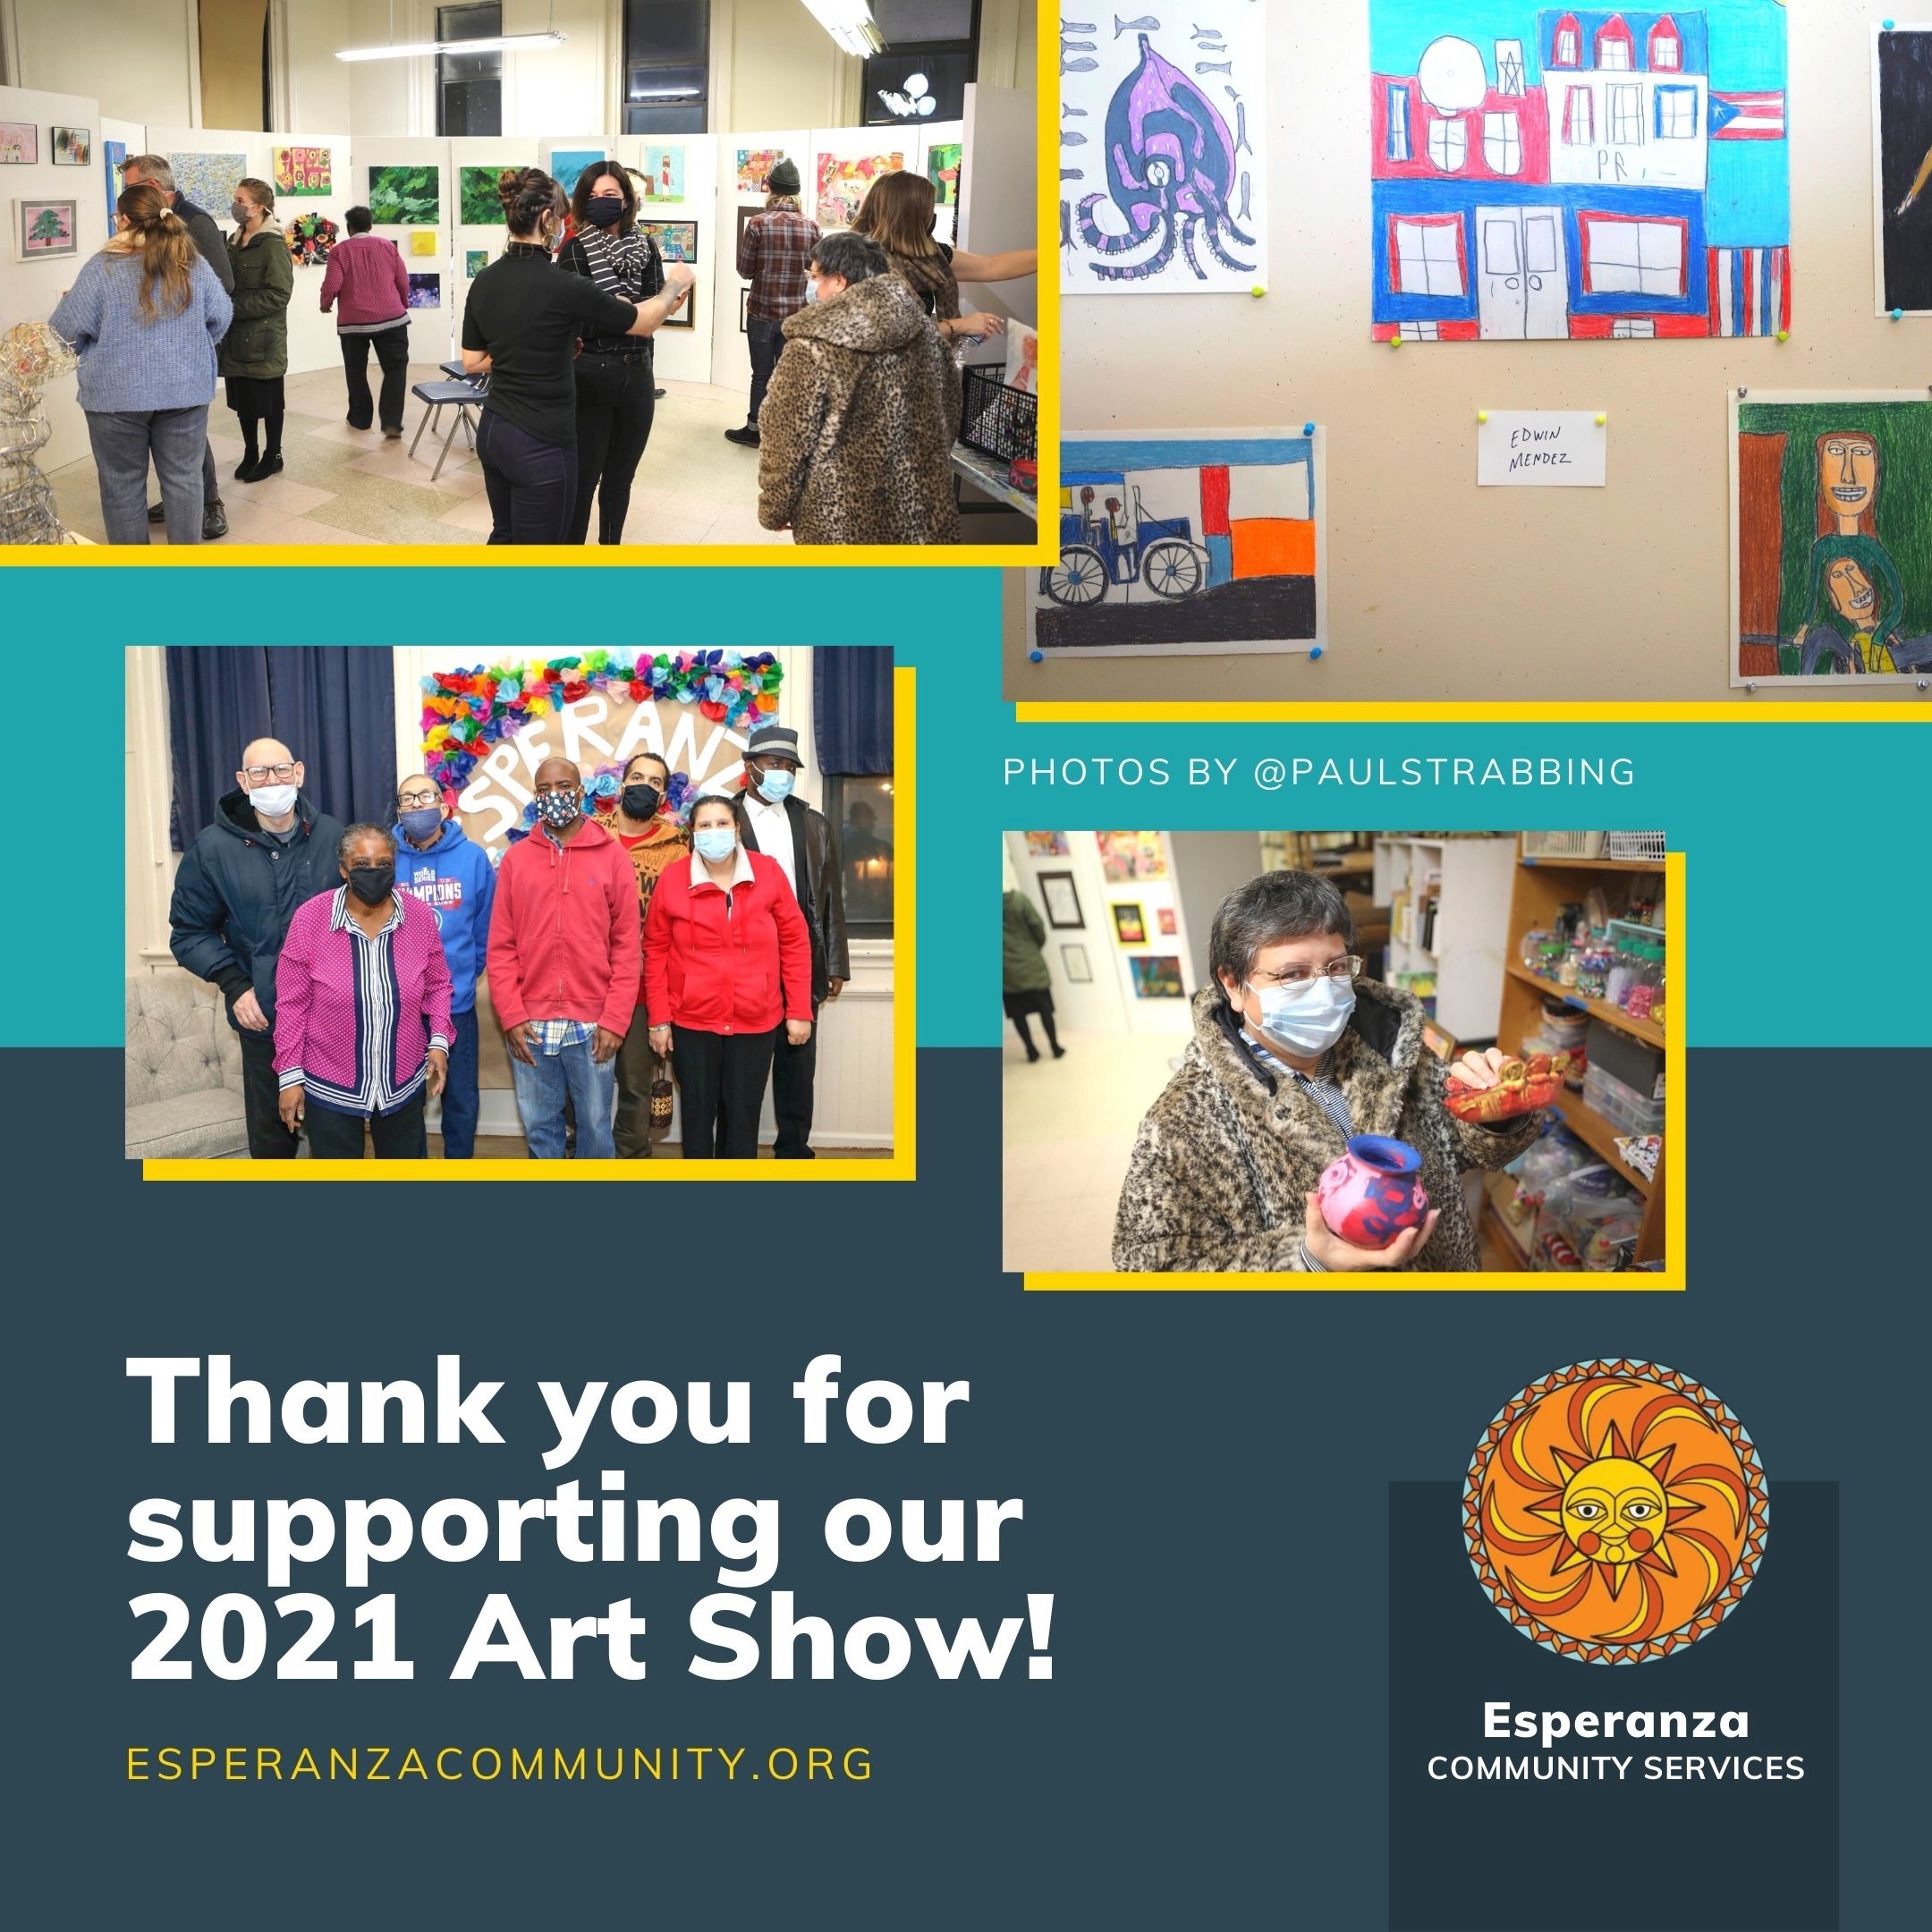 Thank You message and Photos from the 2021 Art Show by @PaulStrabbing.